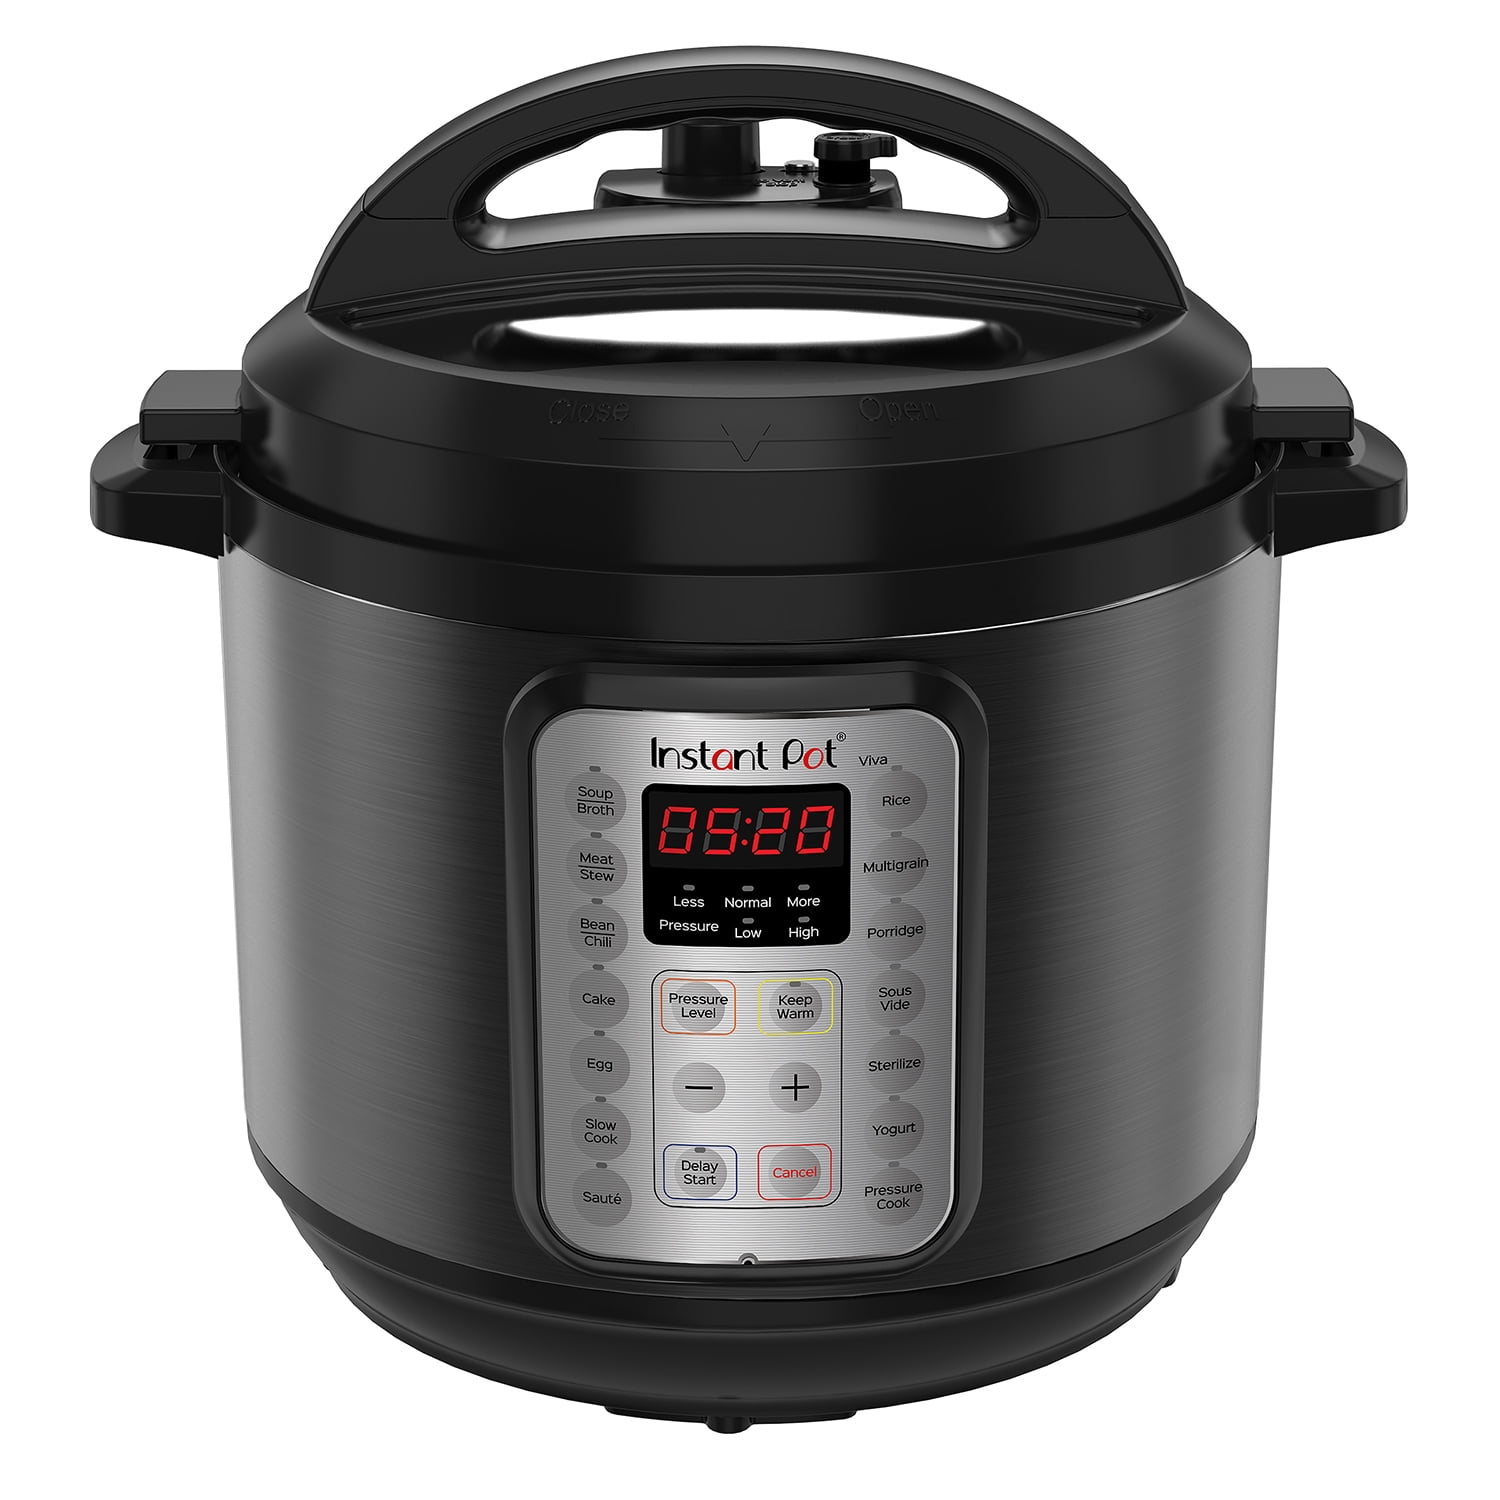 Instant Pot's Max Pressure Cooker Is $50 Off Right Now on